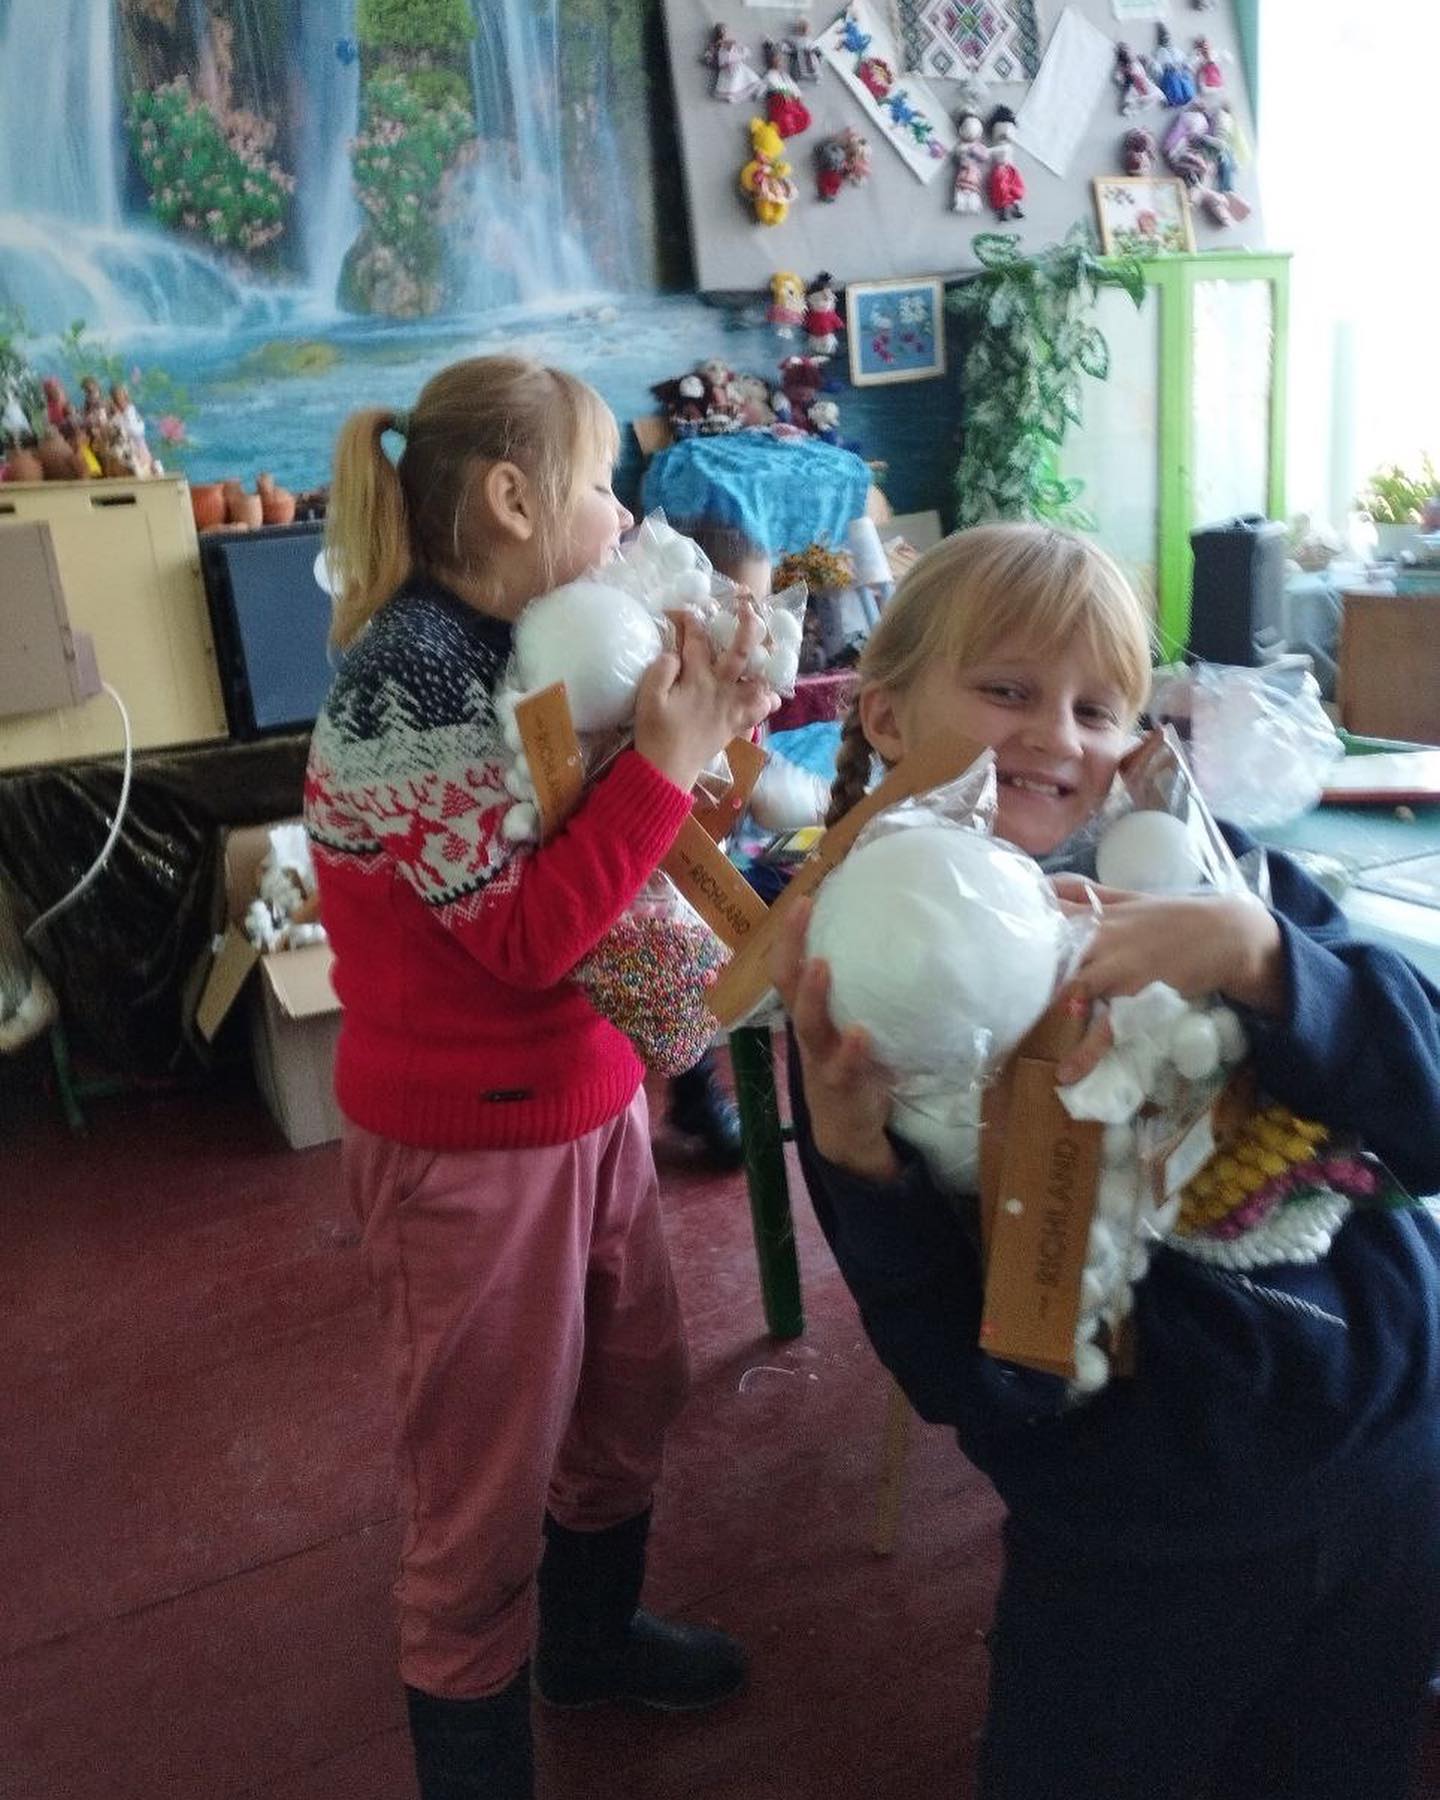 Two girls playing with stuffed animals in a room.